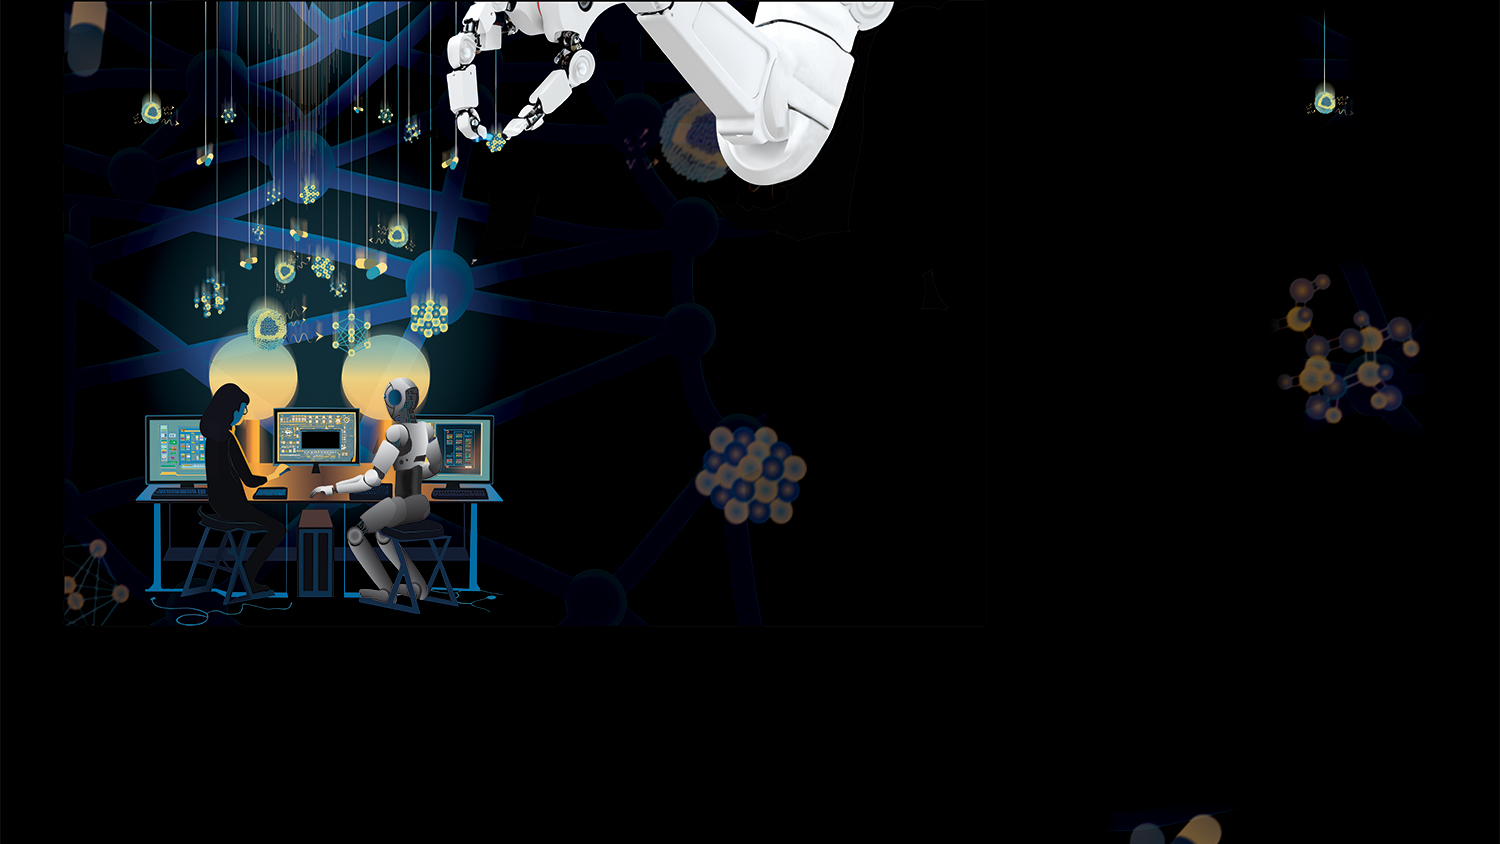 artist illustration of a self driving lab. black background with a human and robot working at three desktop computers (left), a white robotic arm above them and several molecules scattered around the image.